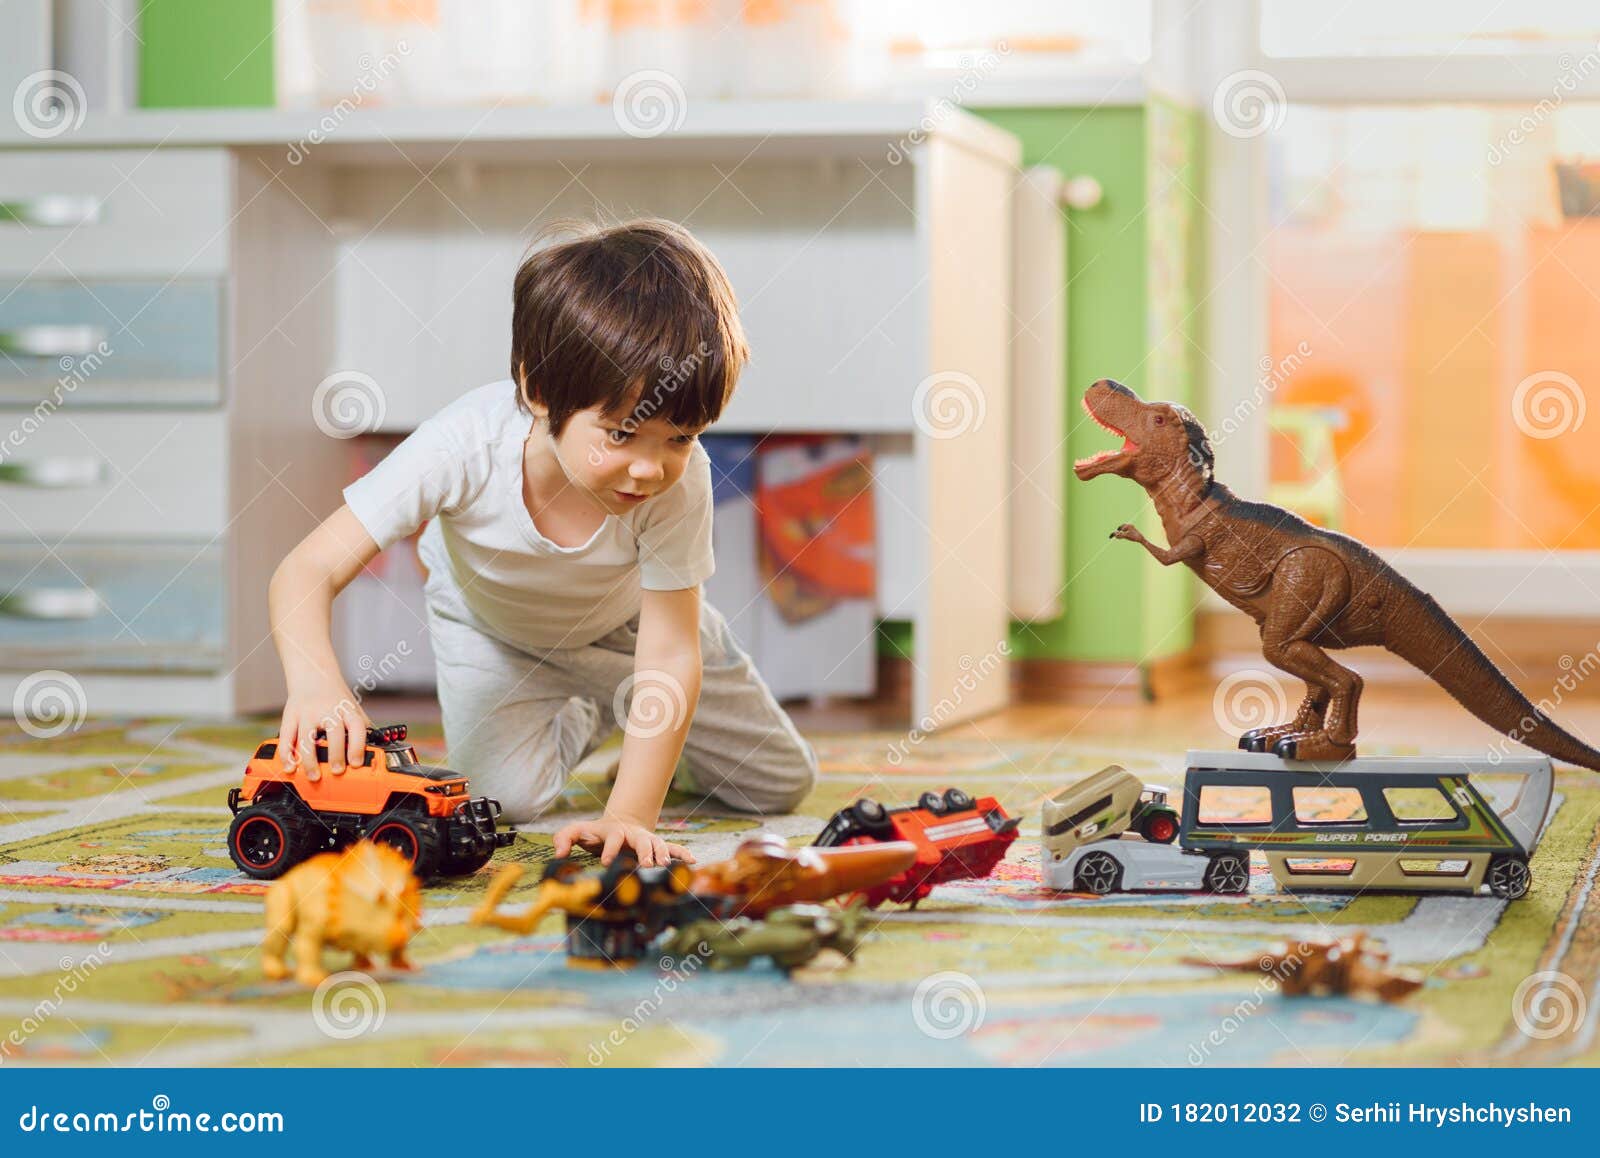 198,946 Kid Play Toy Photos - Free  Royalty-Free Stock Photos from  Dreamstime